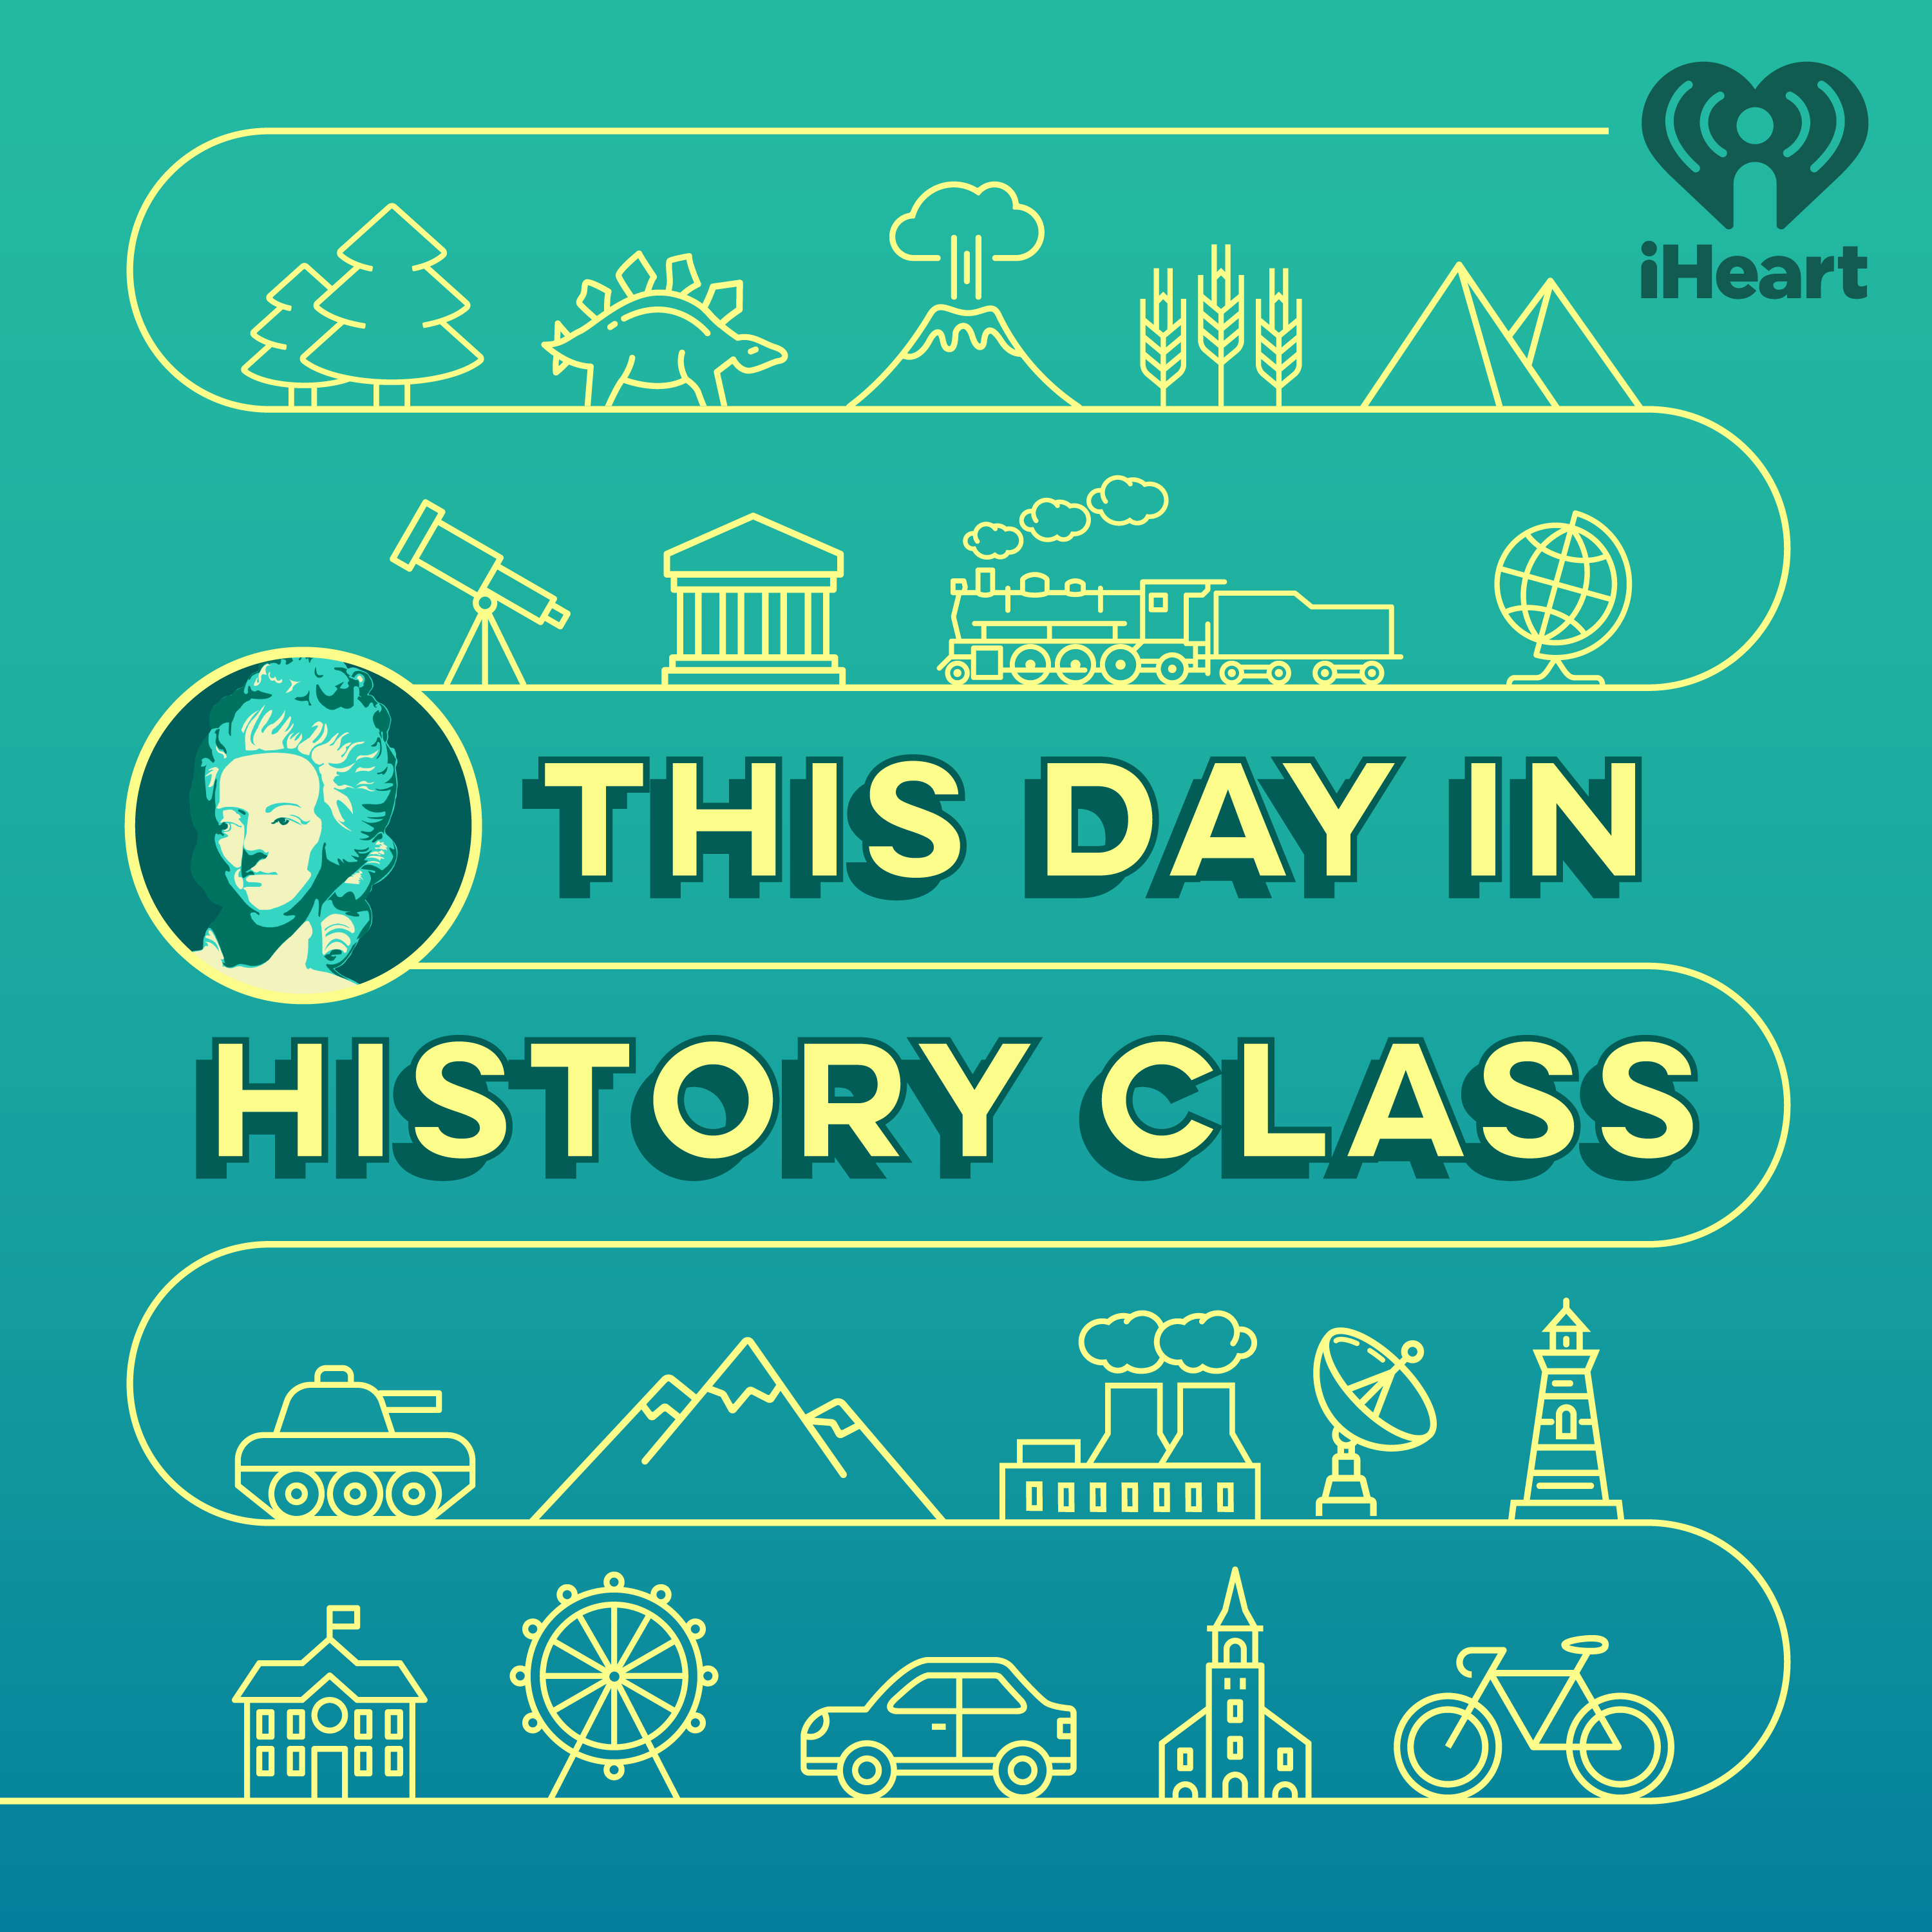 This Day In History Class - December 5th